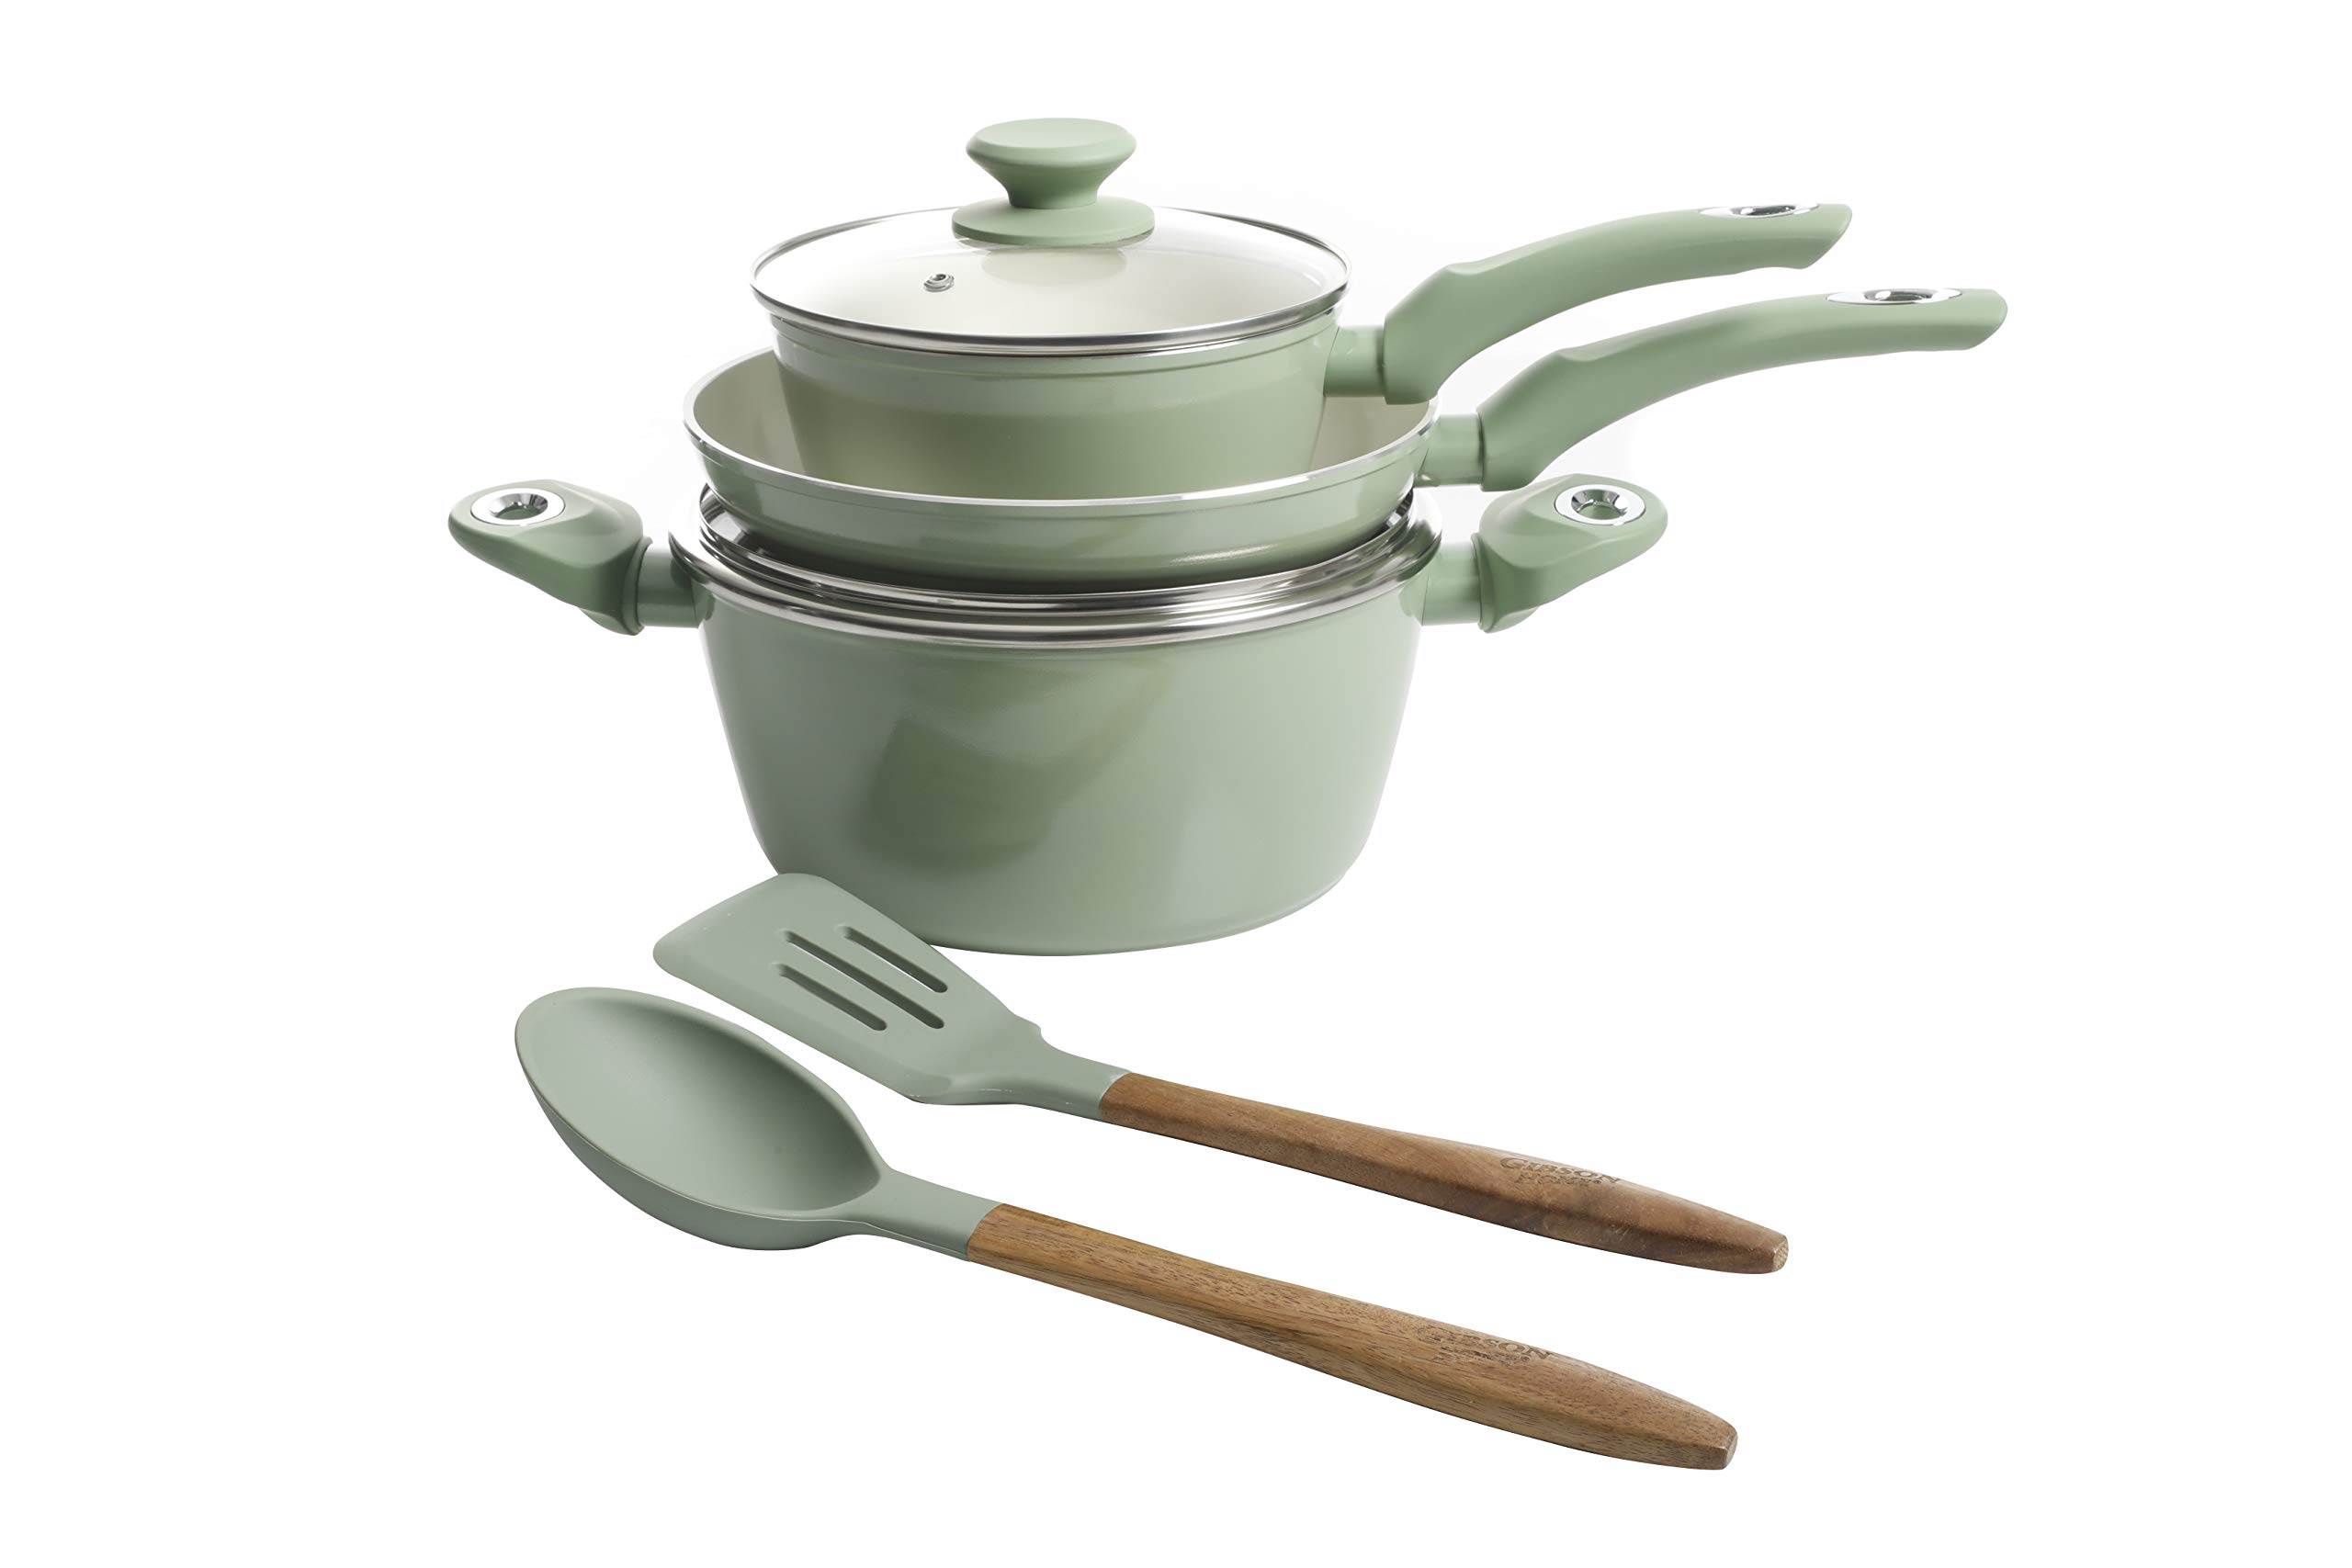 Gibson Home Plaze Café' Forged Aluminum Non-stick Ceramic Cookware with Induction Base and Soft Touch Bakelite Handle, 7-Piece Set, Mint Green